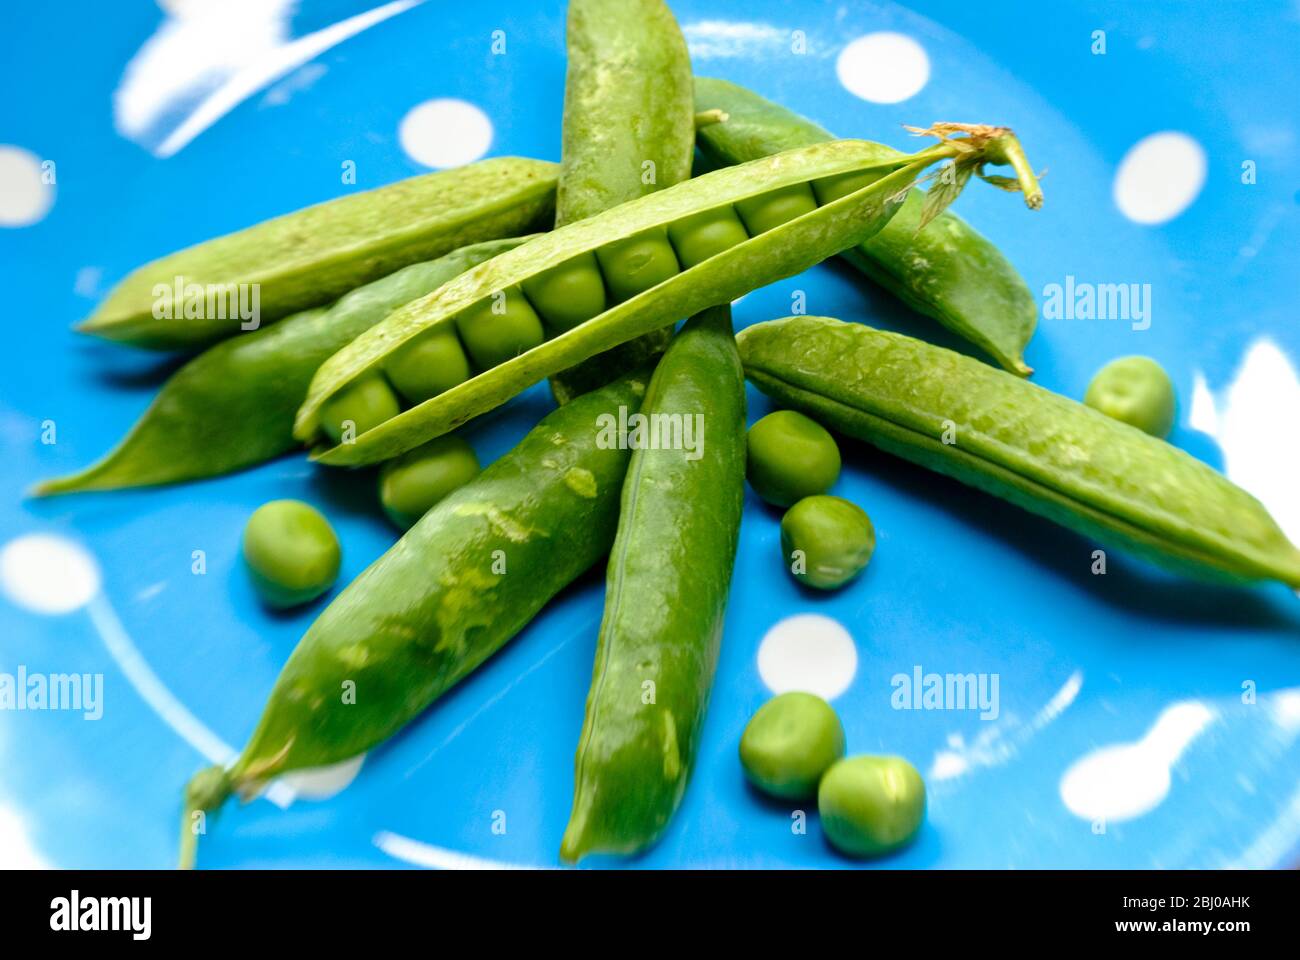 Fresh garden peas in their pods on blue spotted plate - Stock Photo